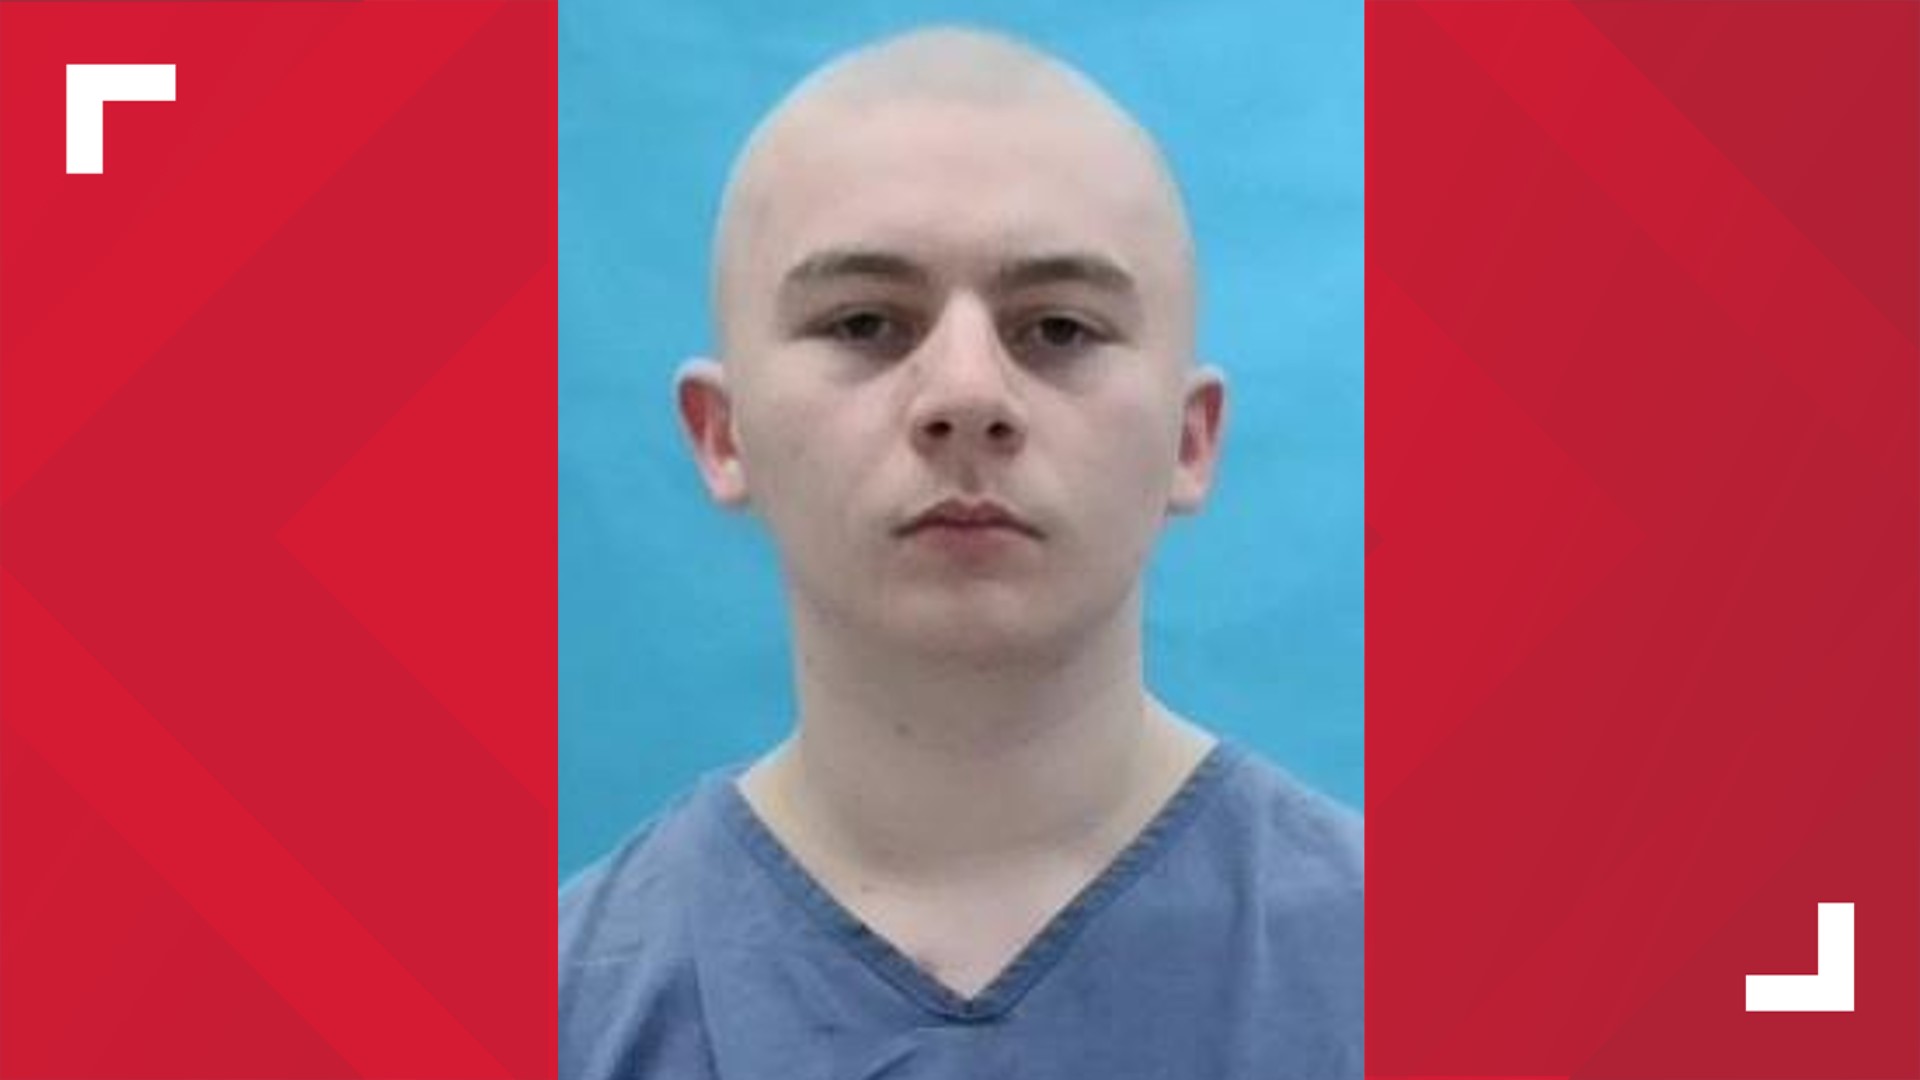 Fucci was found sentenced Friday to life in prison in the death of 13-year-old Tristyn Bailey.